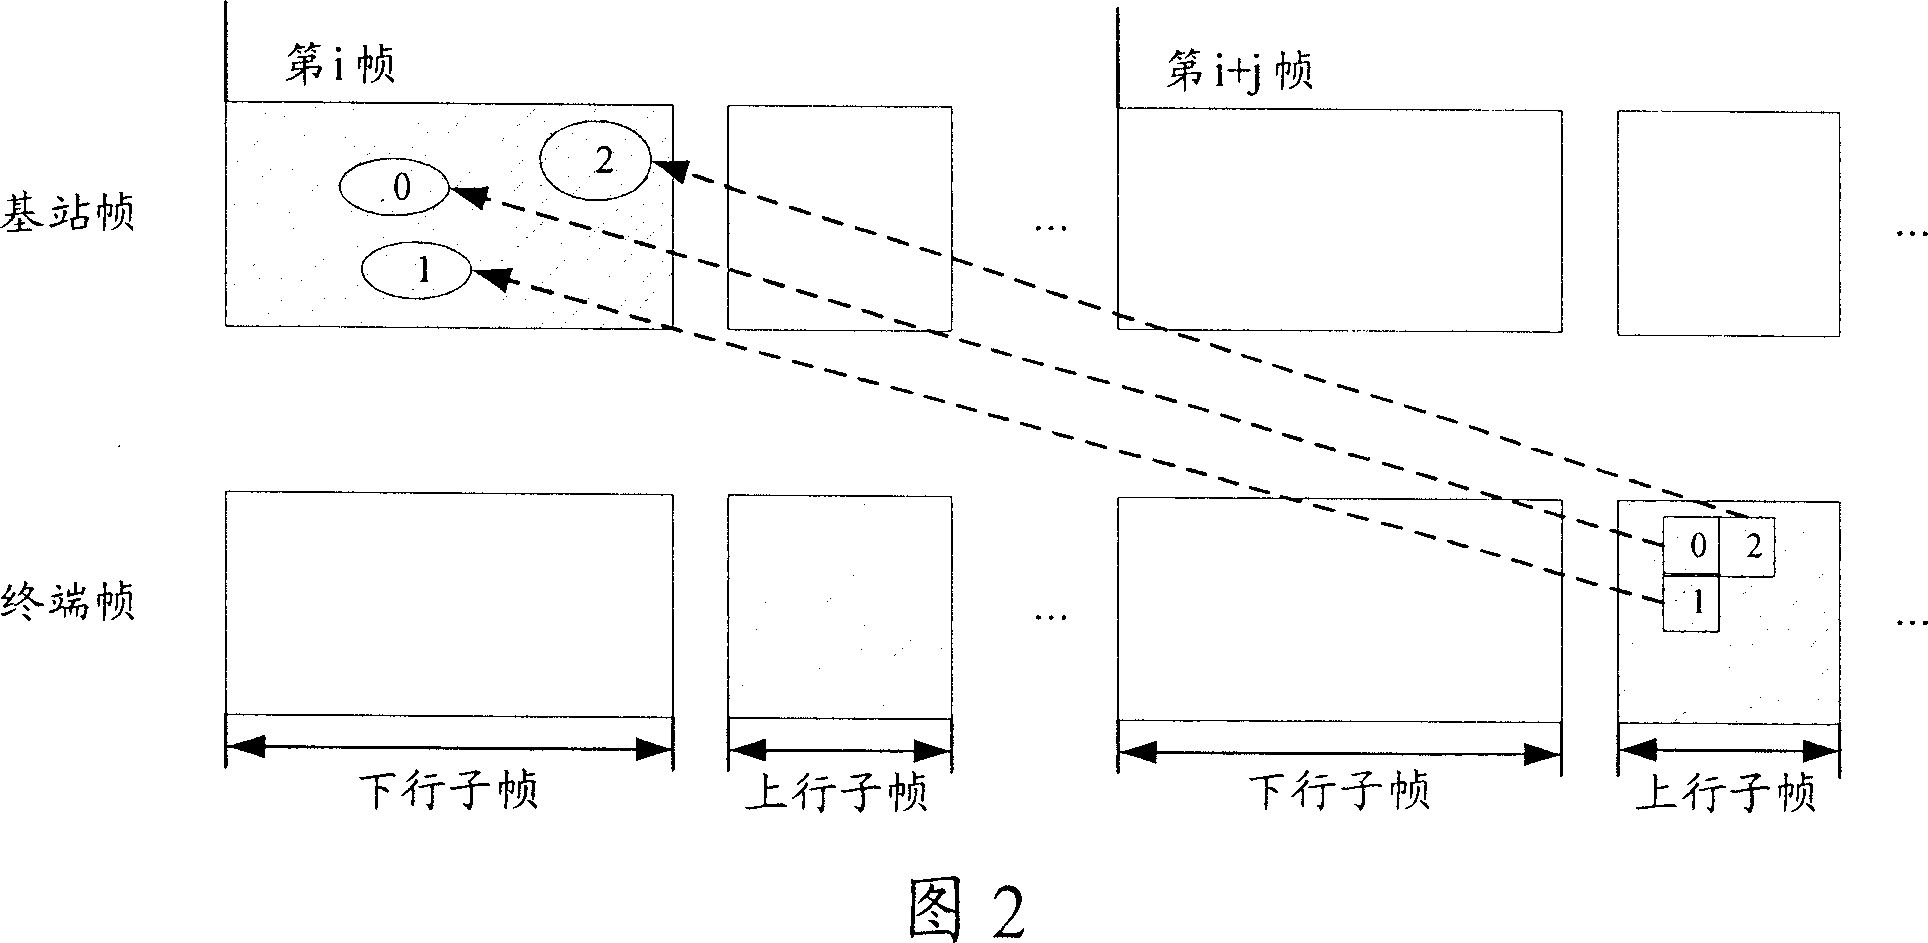 Method for implementing mixed automatic retransmit in communication system containing repeater station